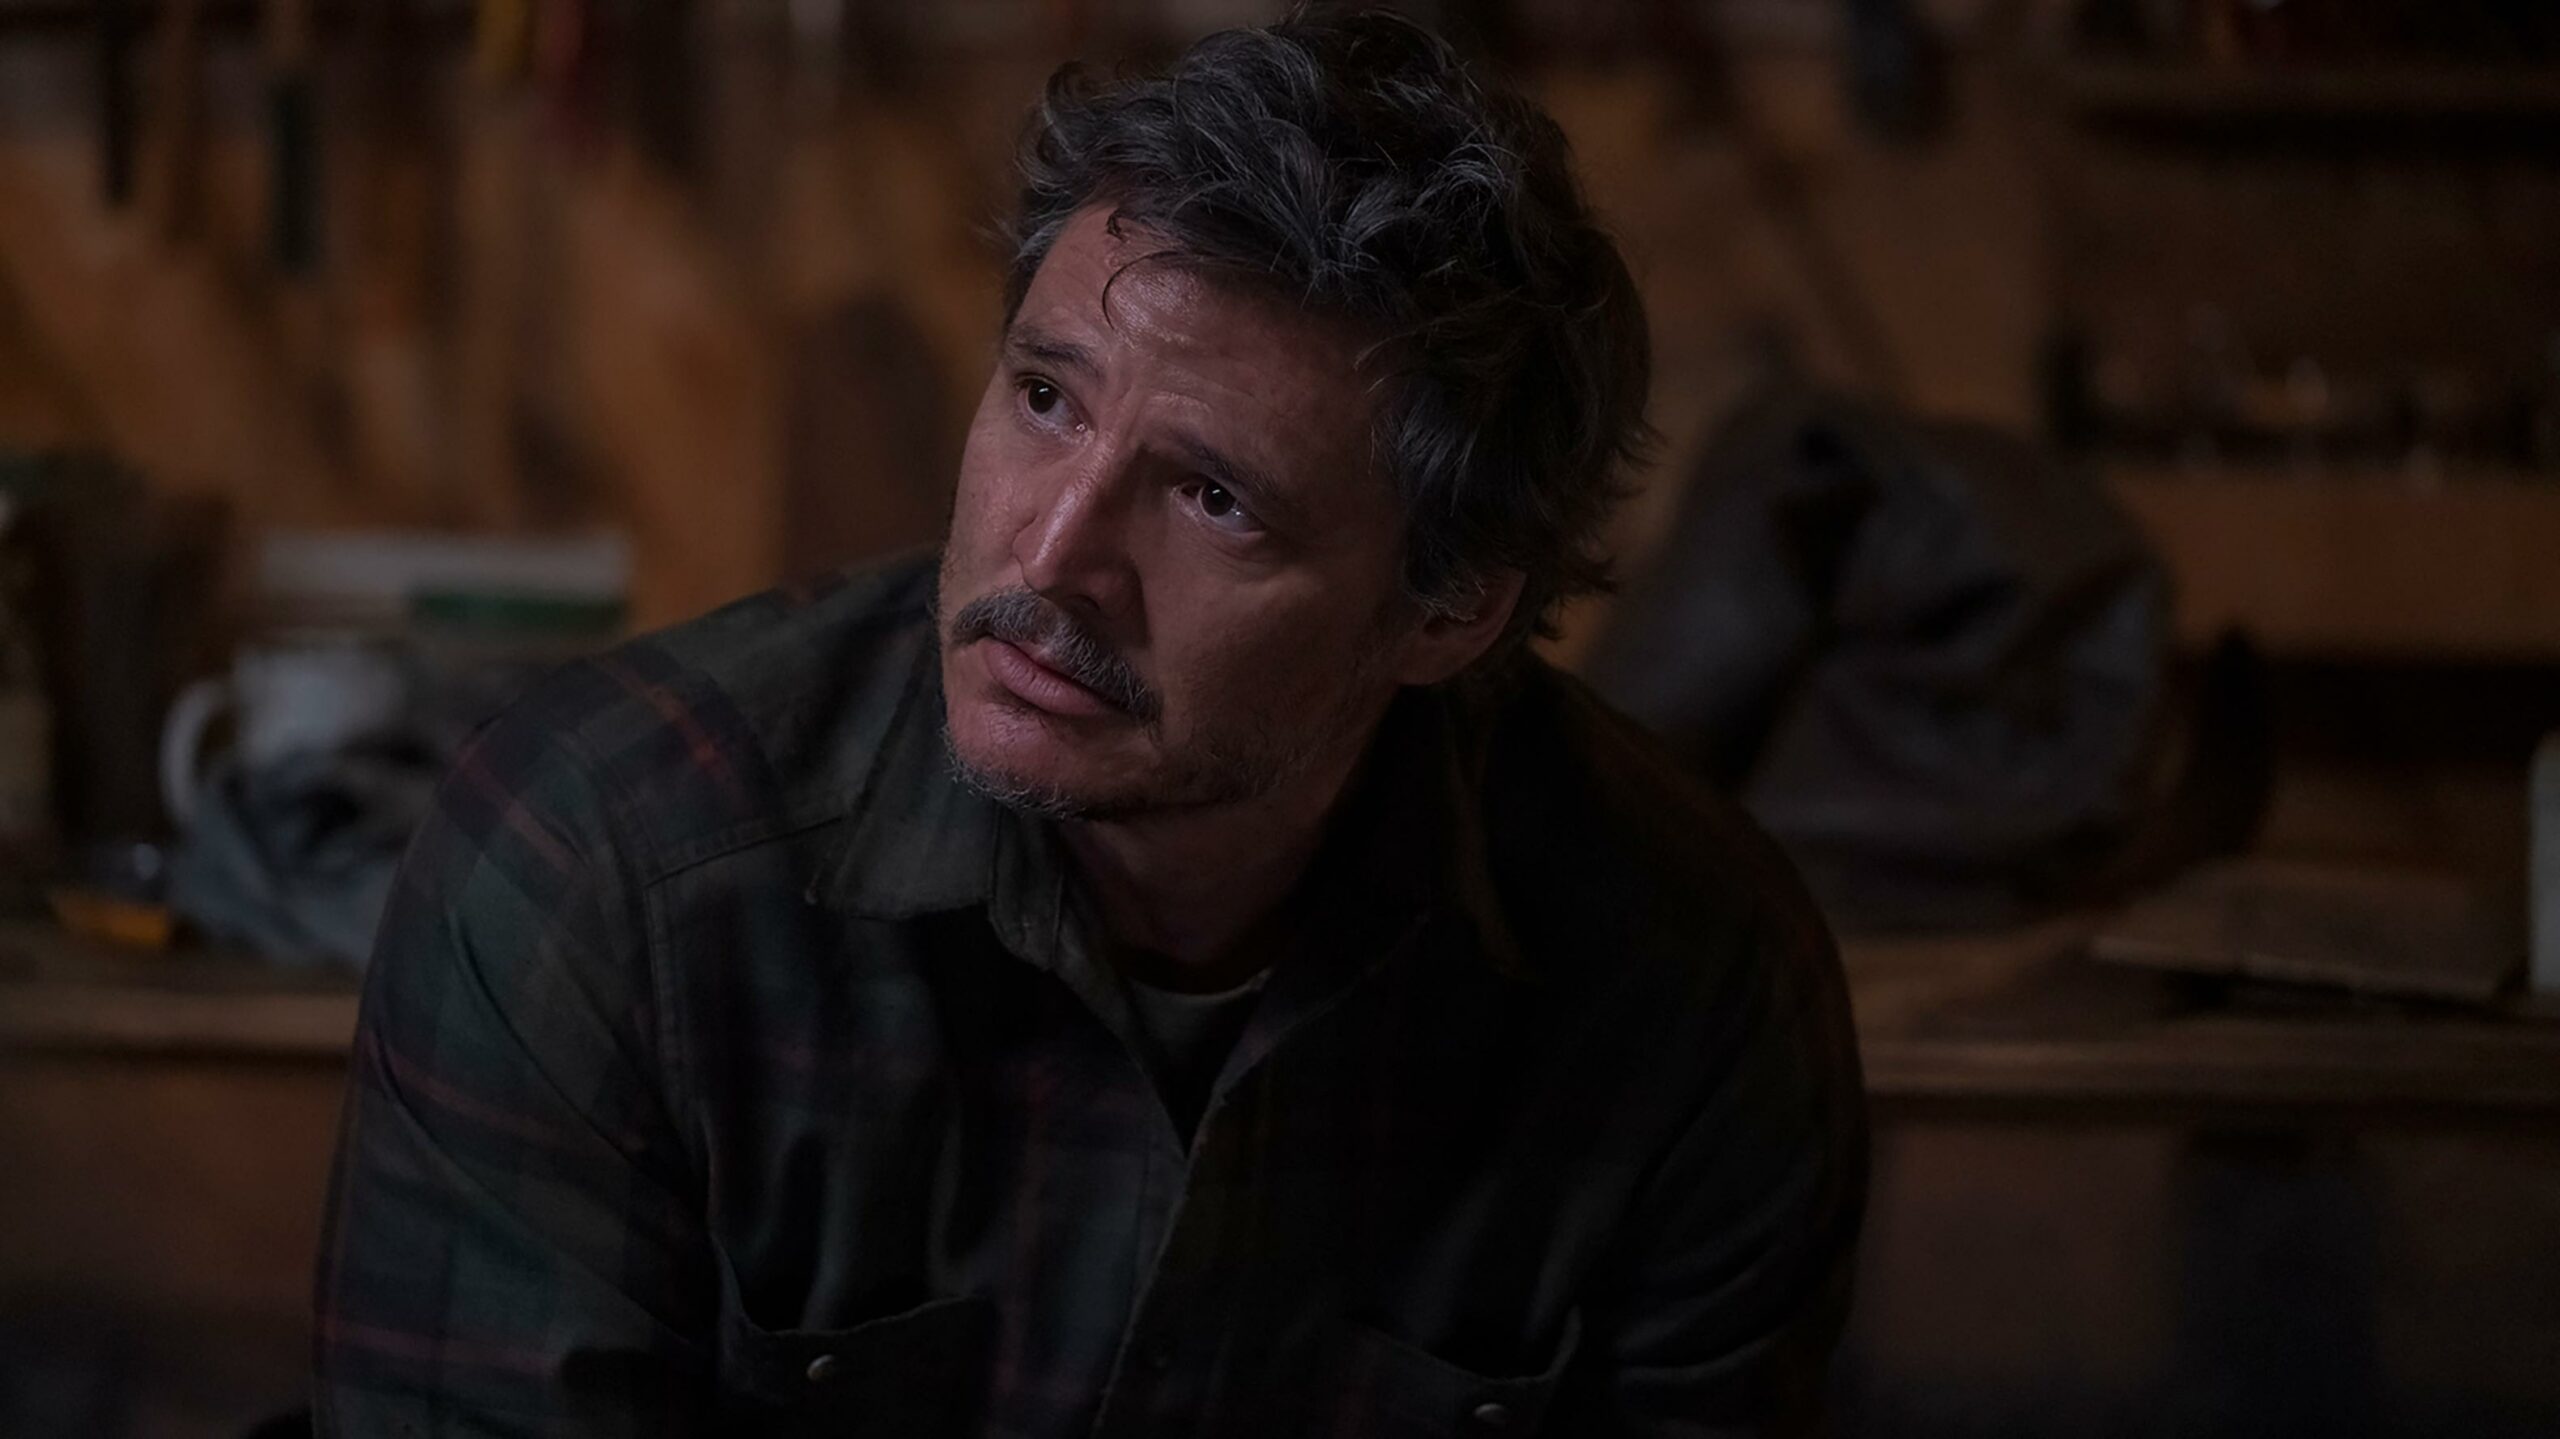 Pedro Pascal And Bella Ramsey In The Last of Us Season 1 4K Ultra HD Mobile